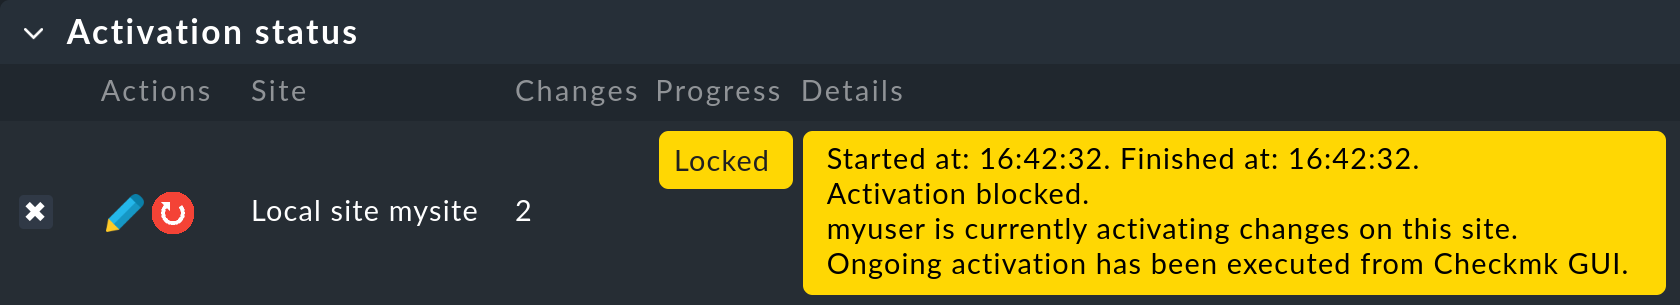 Message that the activation is currently blocked.